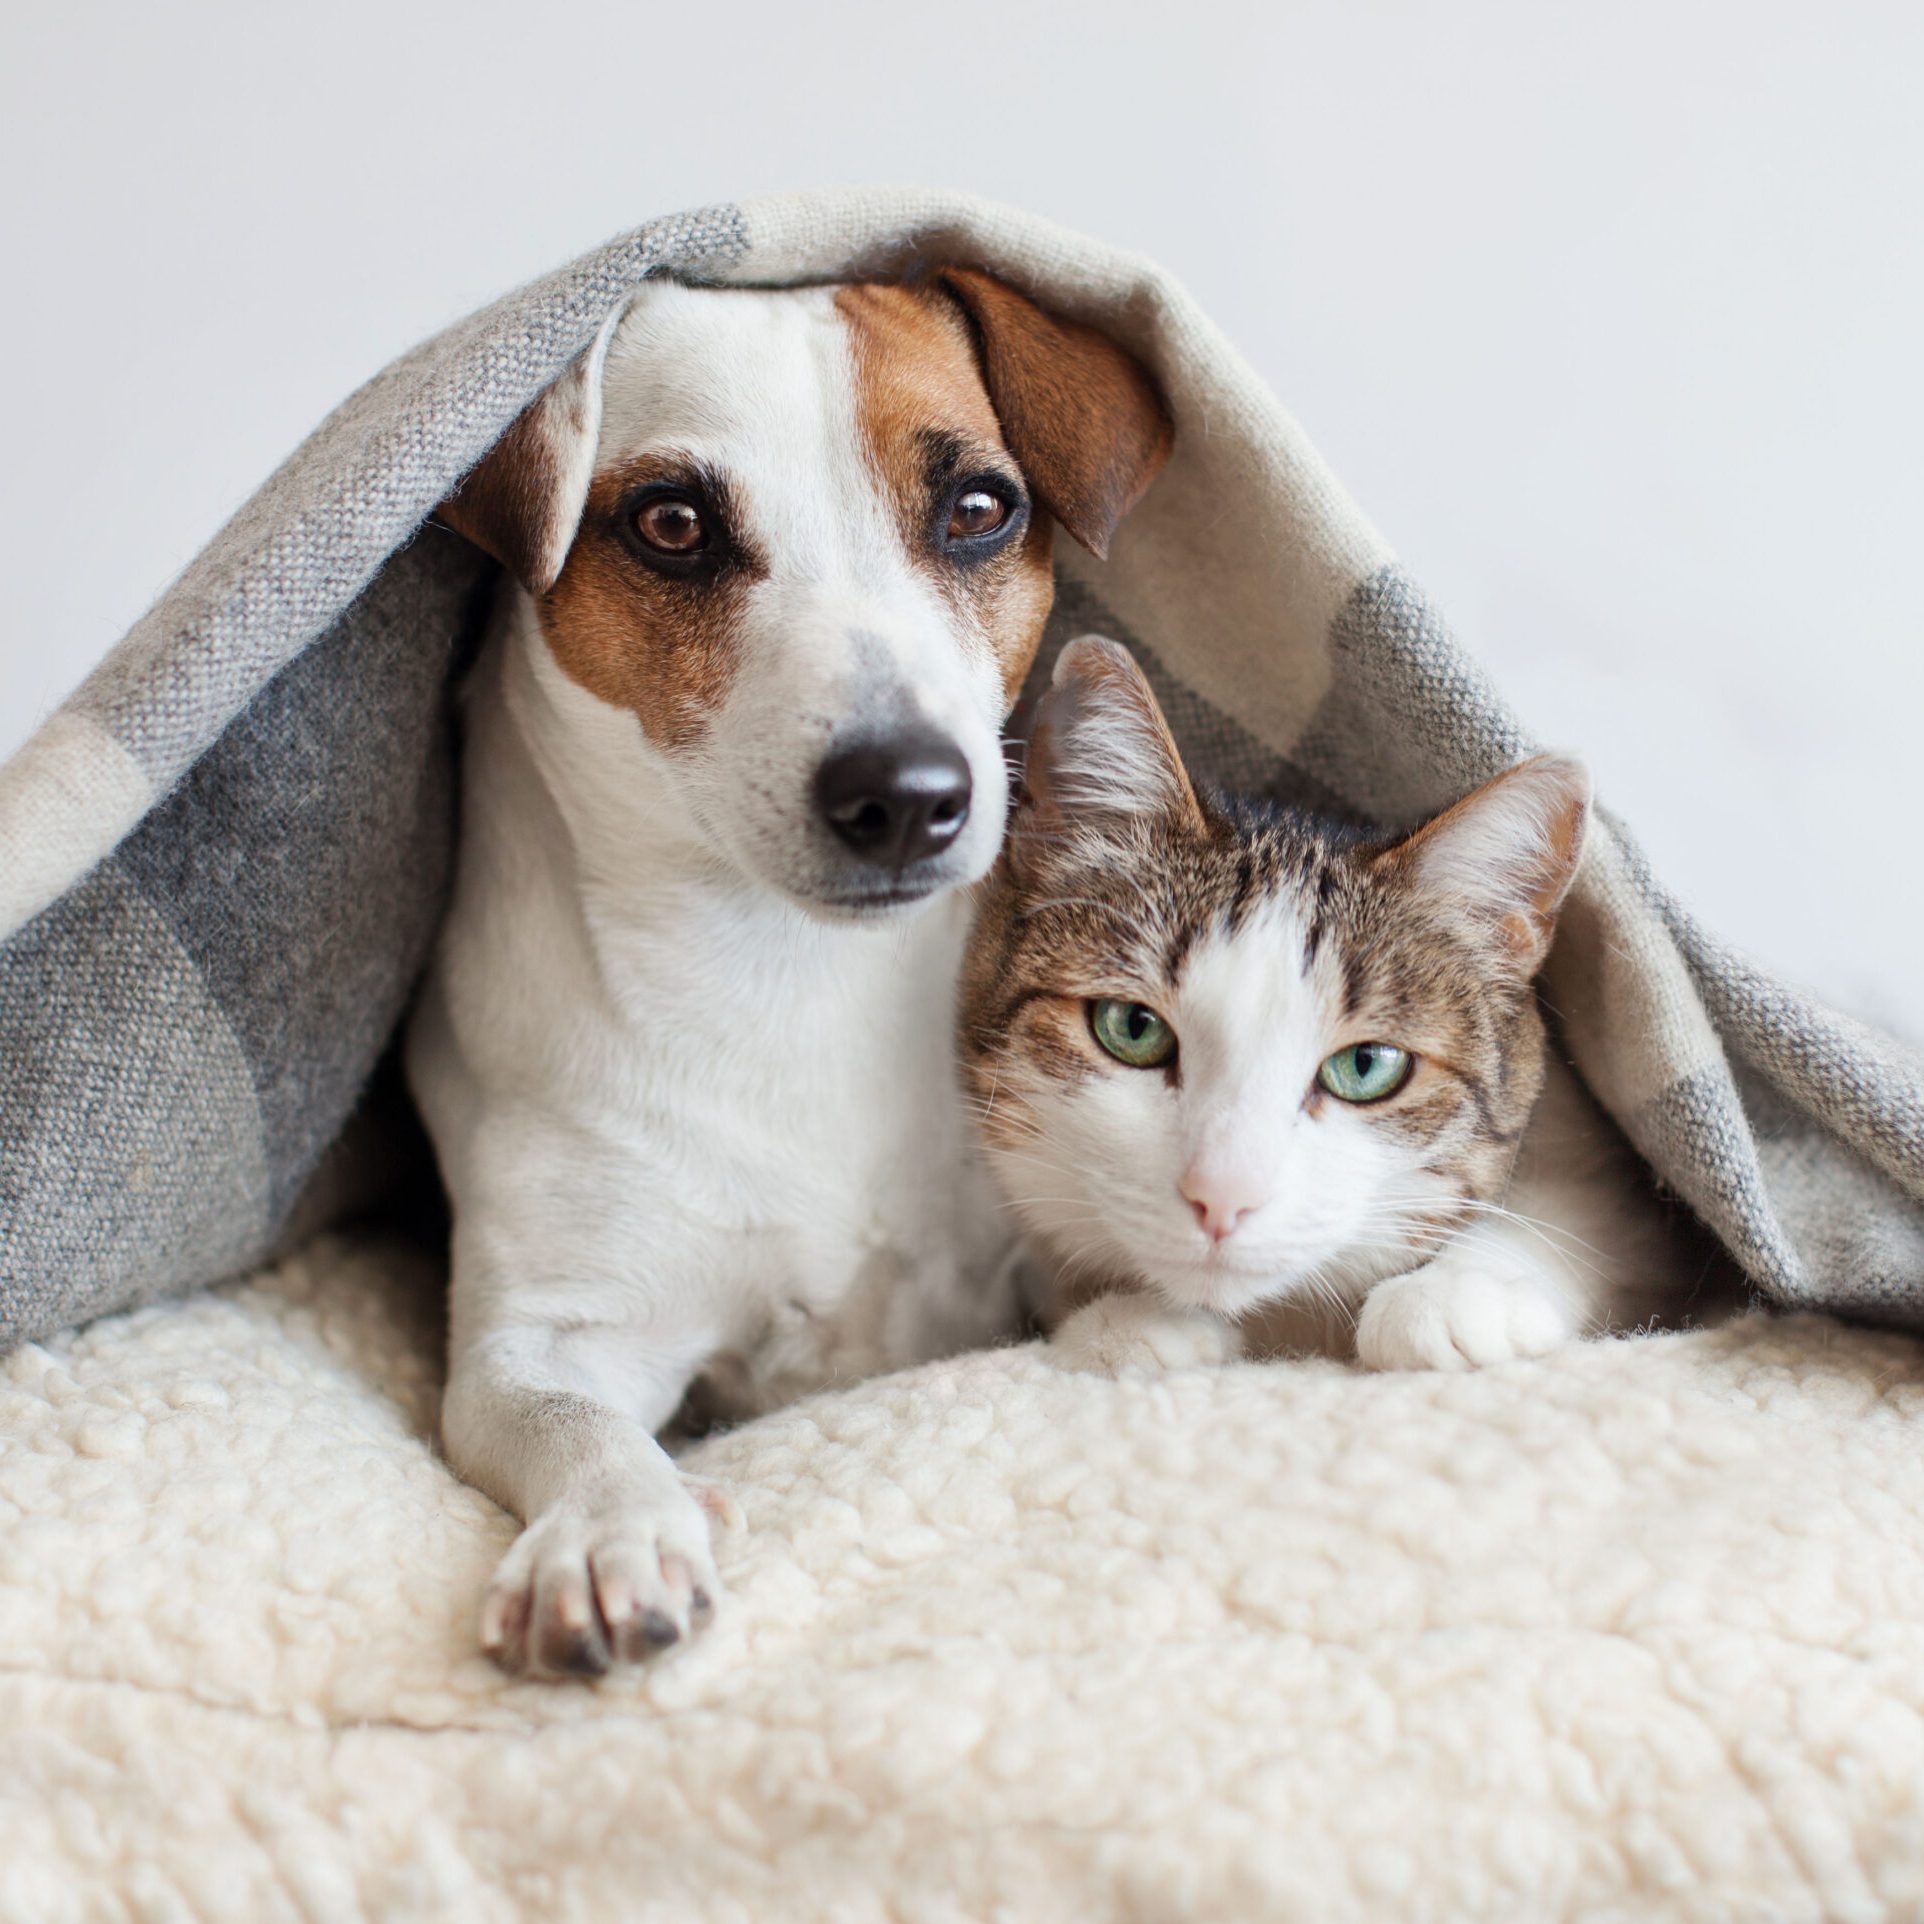 Dog and Cat Under Blanket